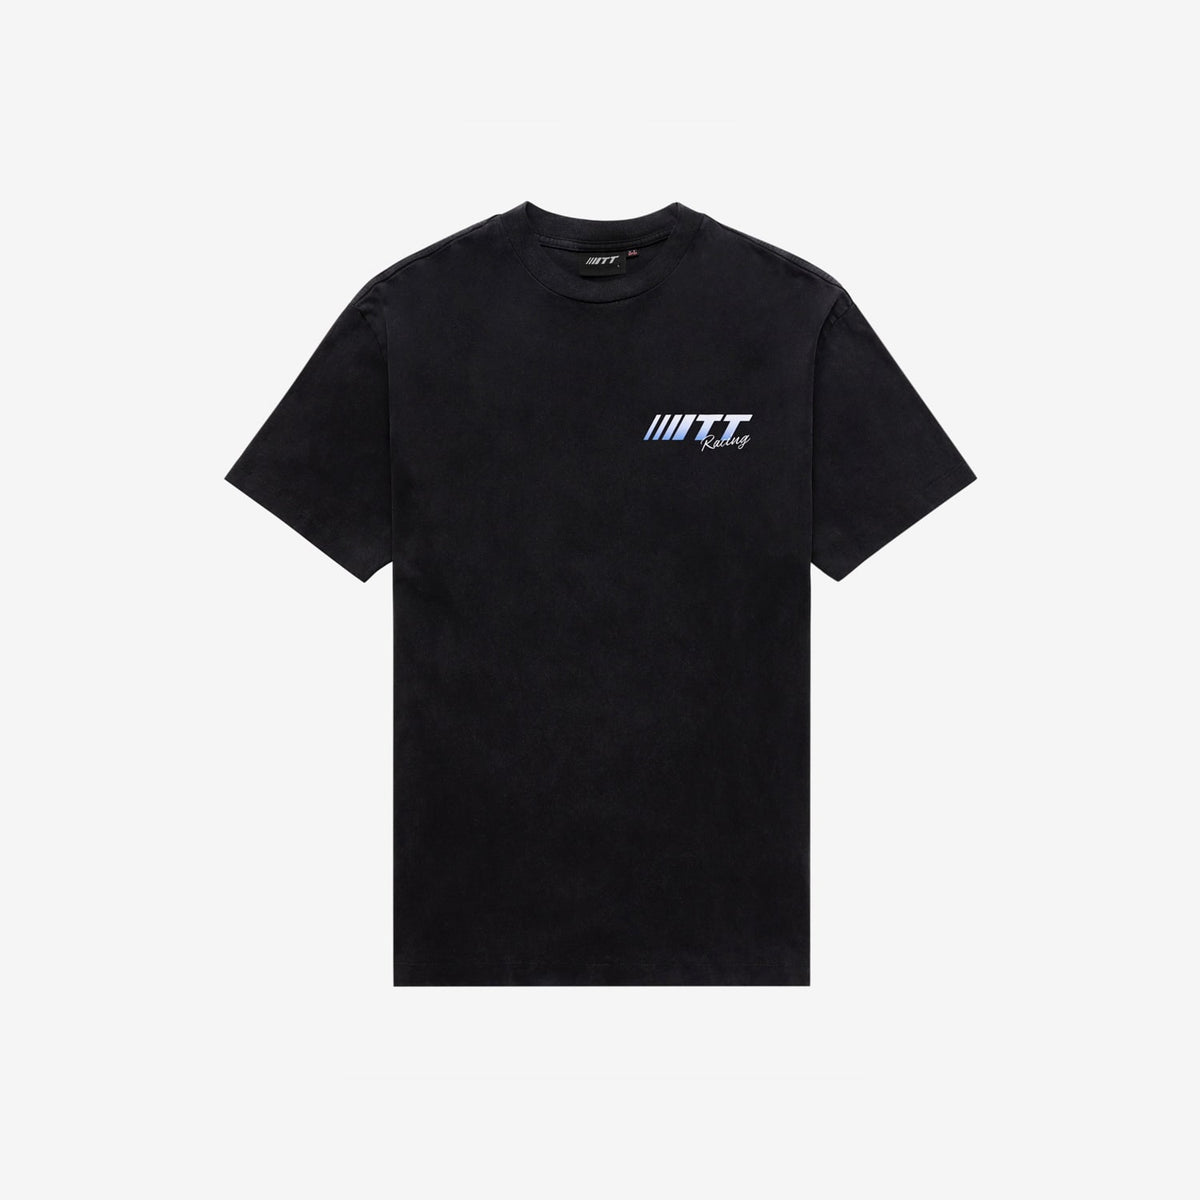 LMGT2 Relaxed Fit Tee Vintage Black